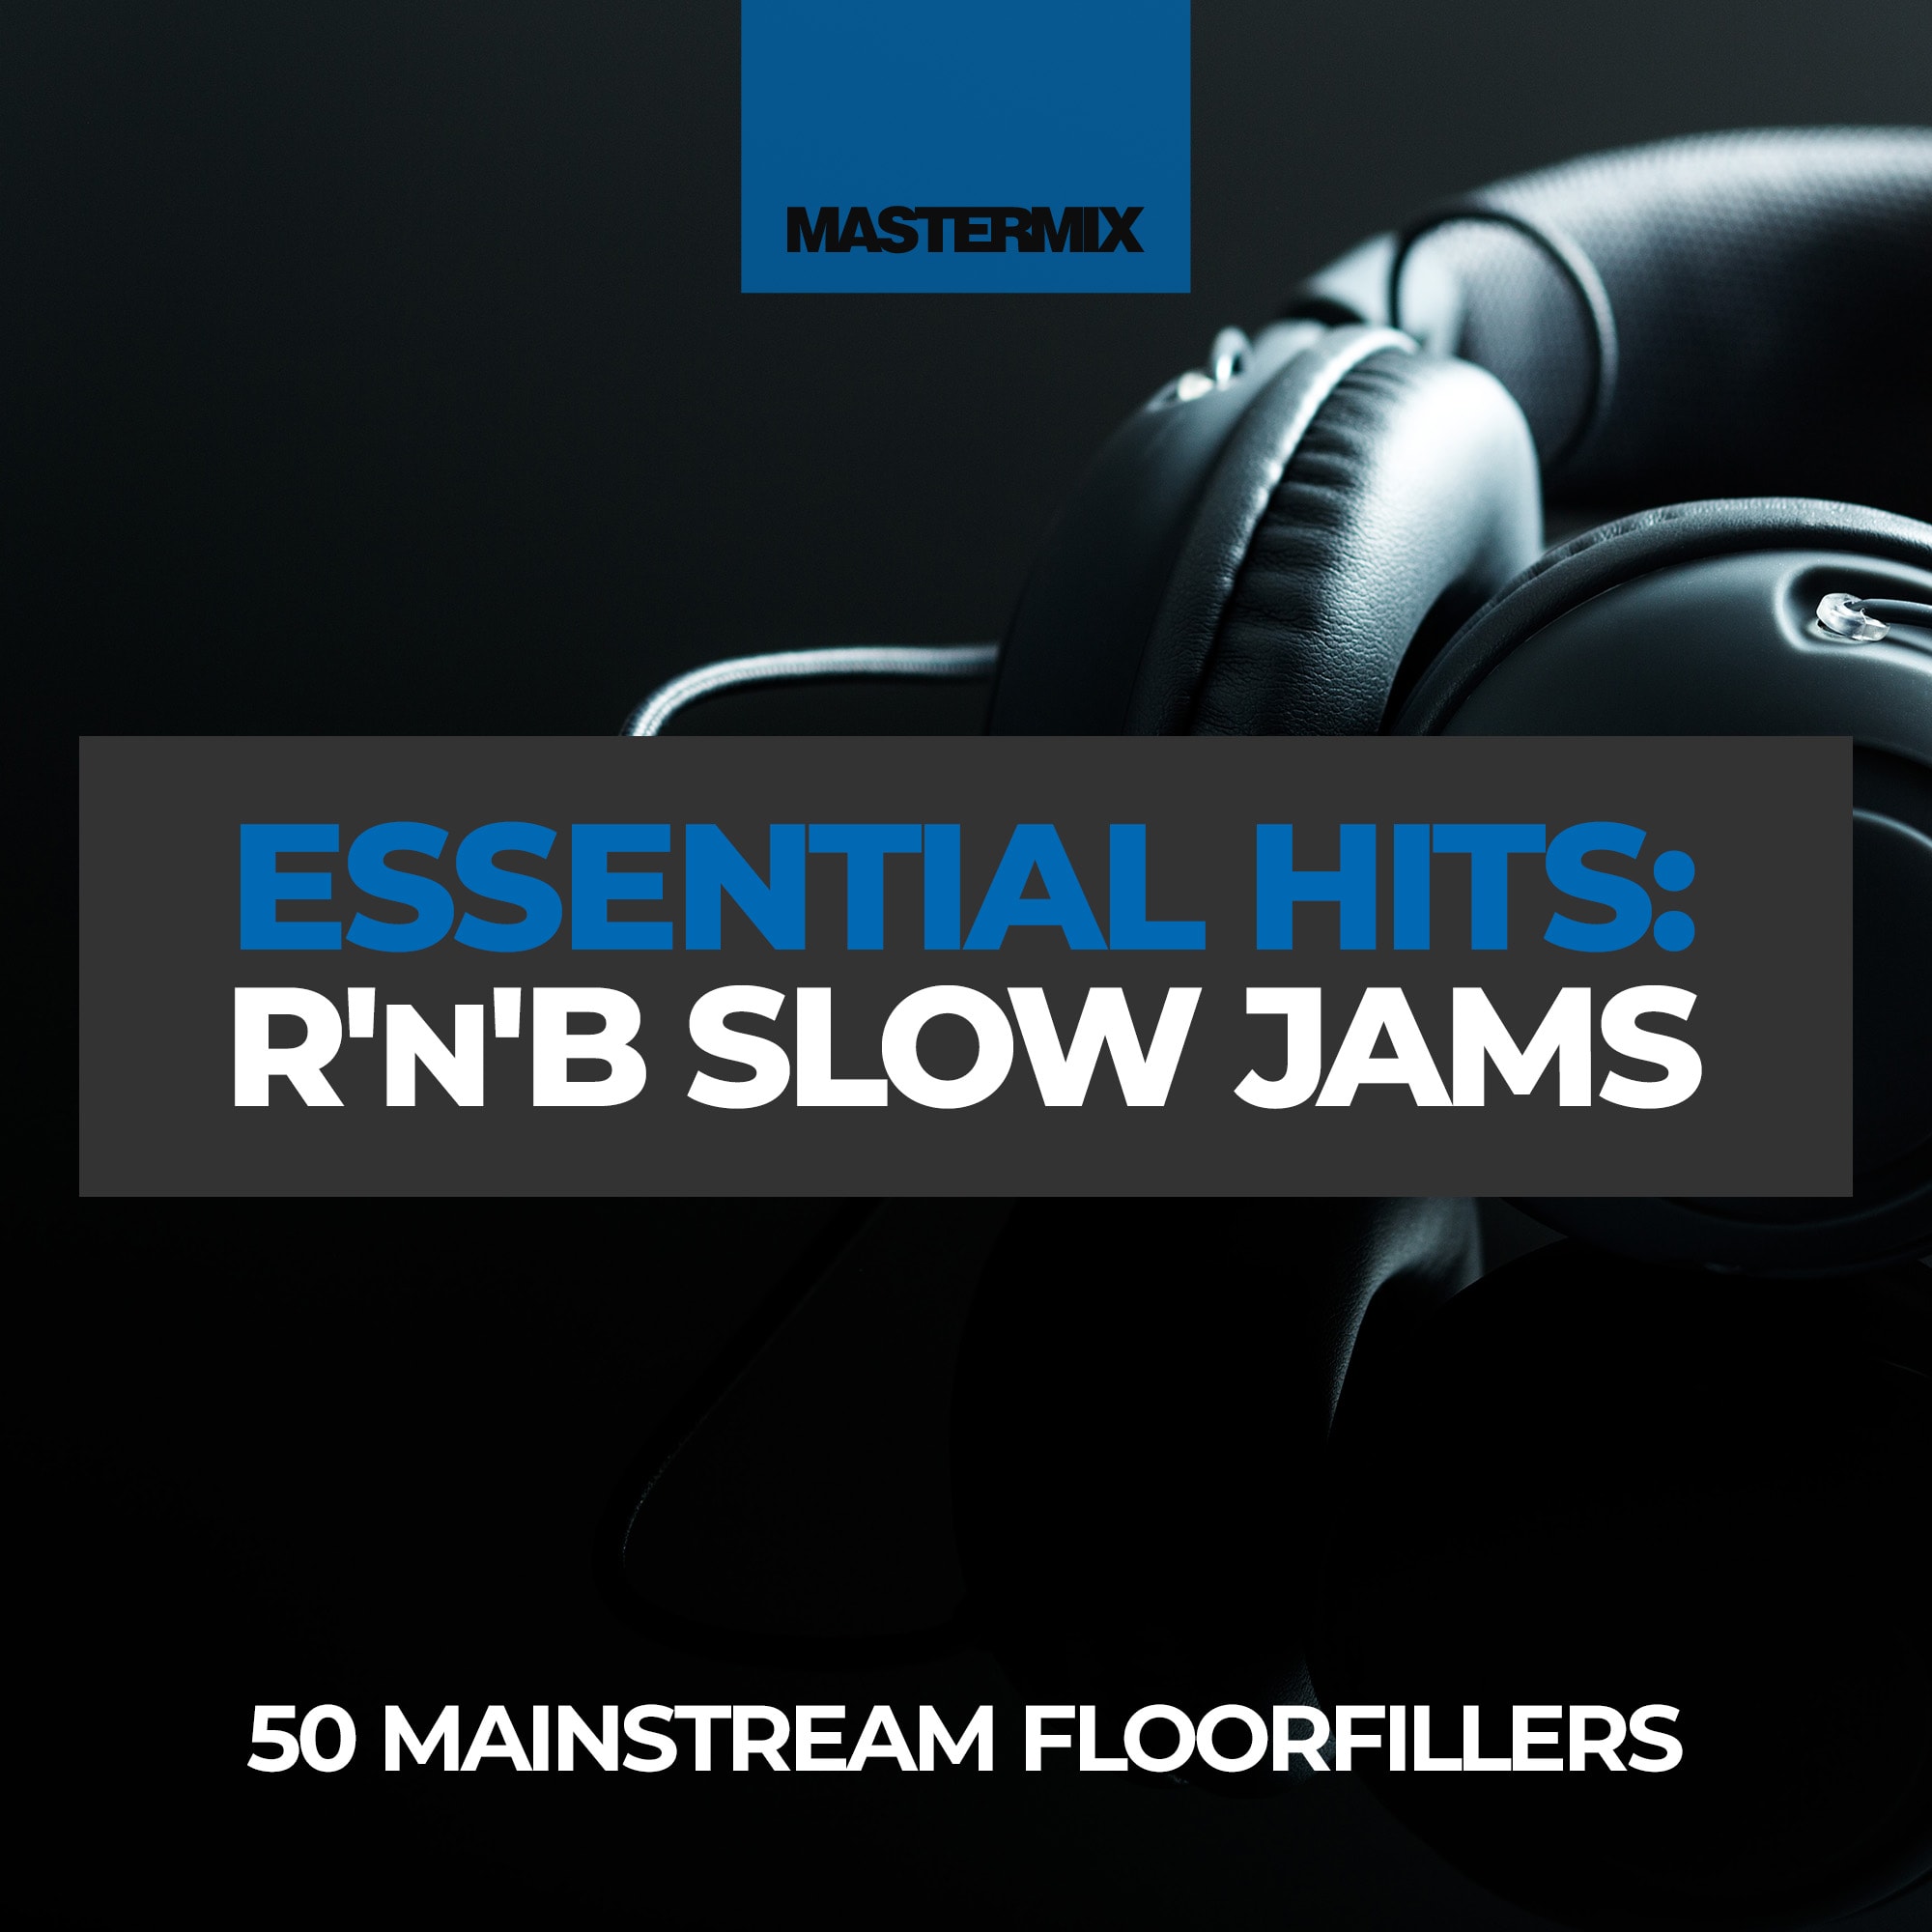 mastermix essential hits r'n'b slow jams front cover